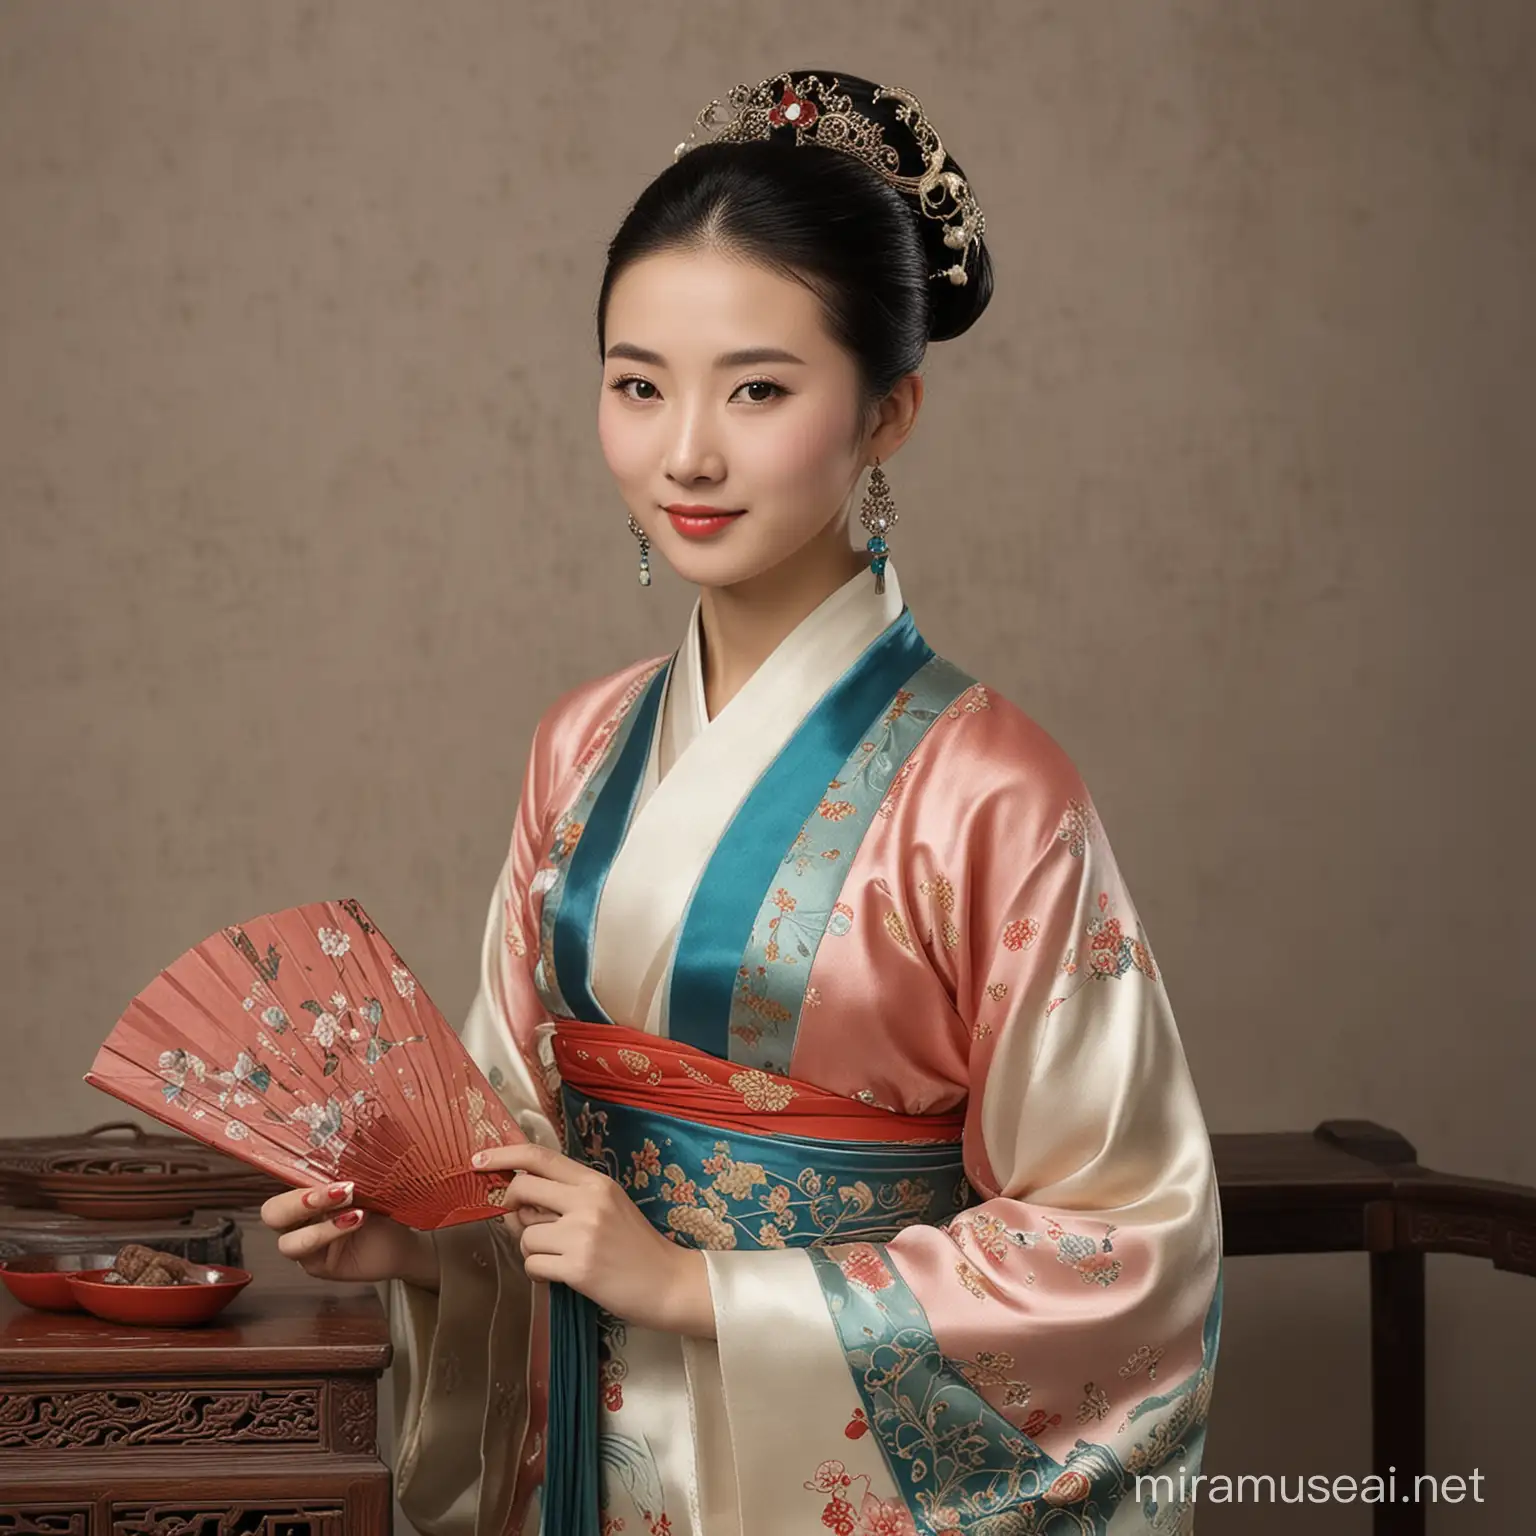 Elegant Chinese AntiqueDressed Woman in Traditional Costume